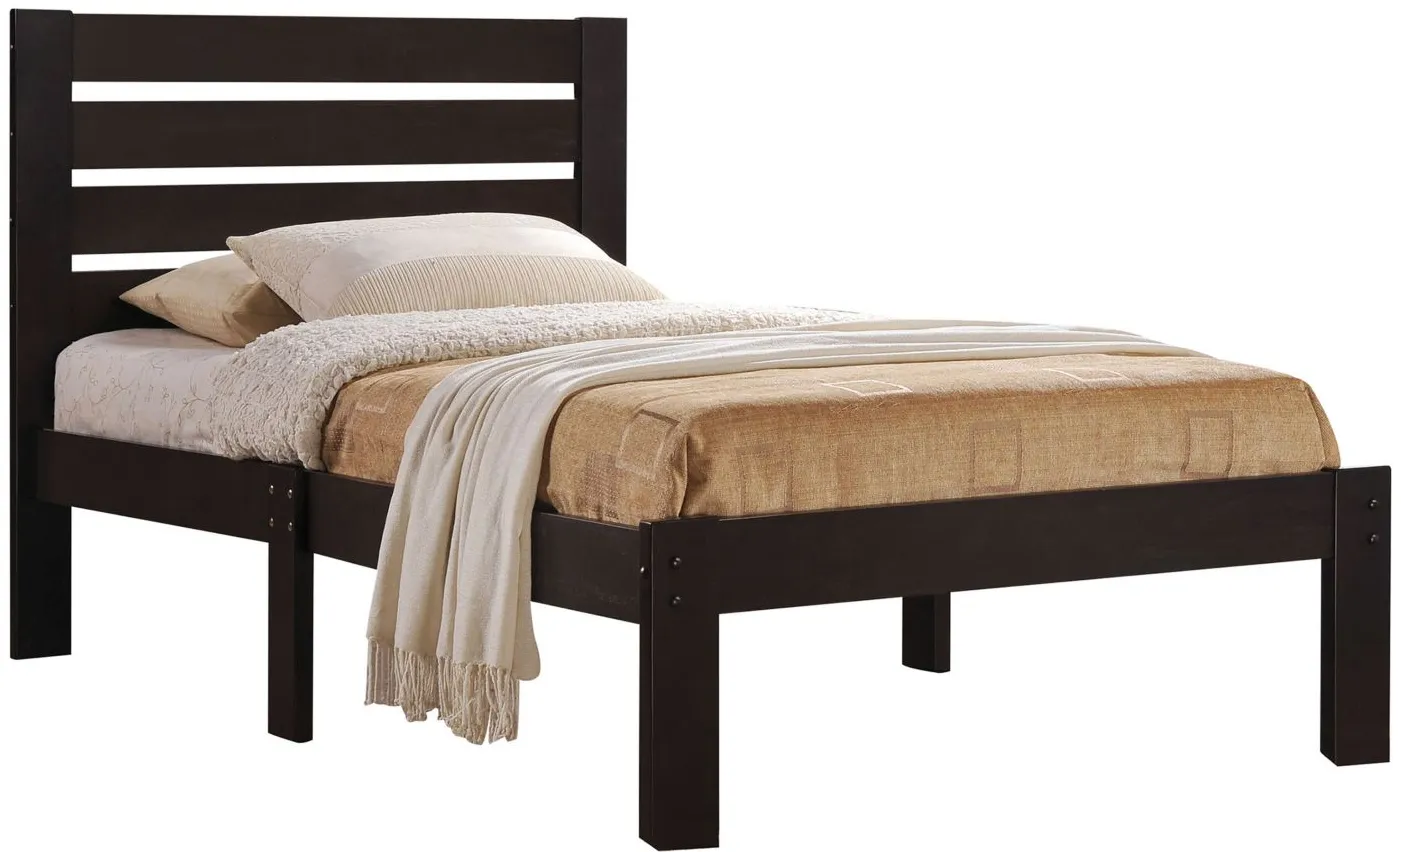 Kenney Bed in Espresso by Acme Furniture Industry